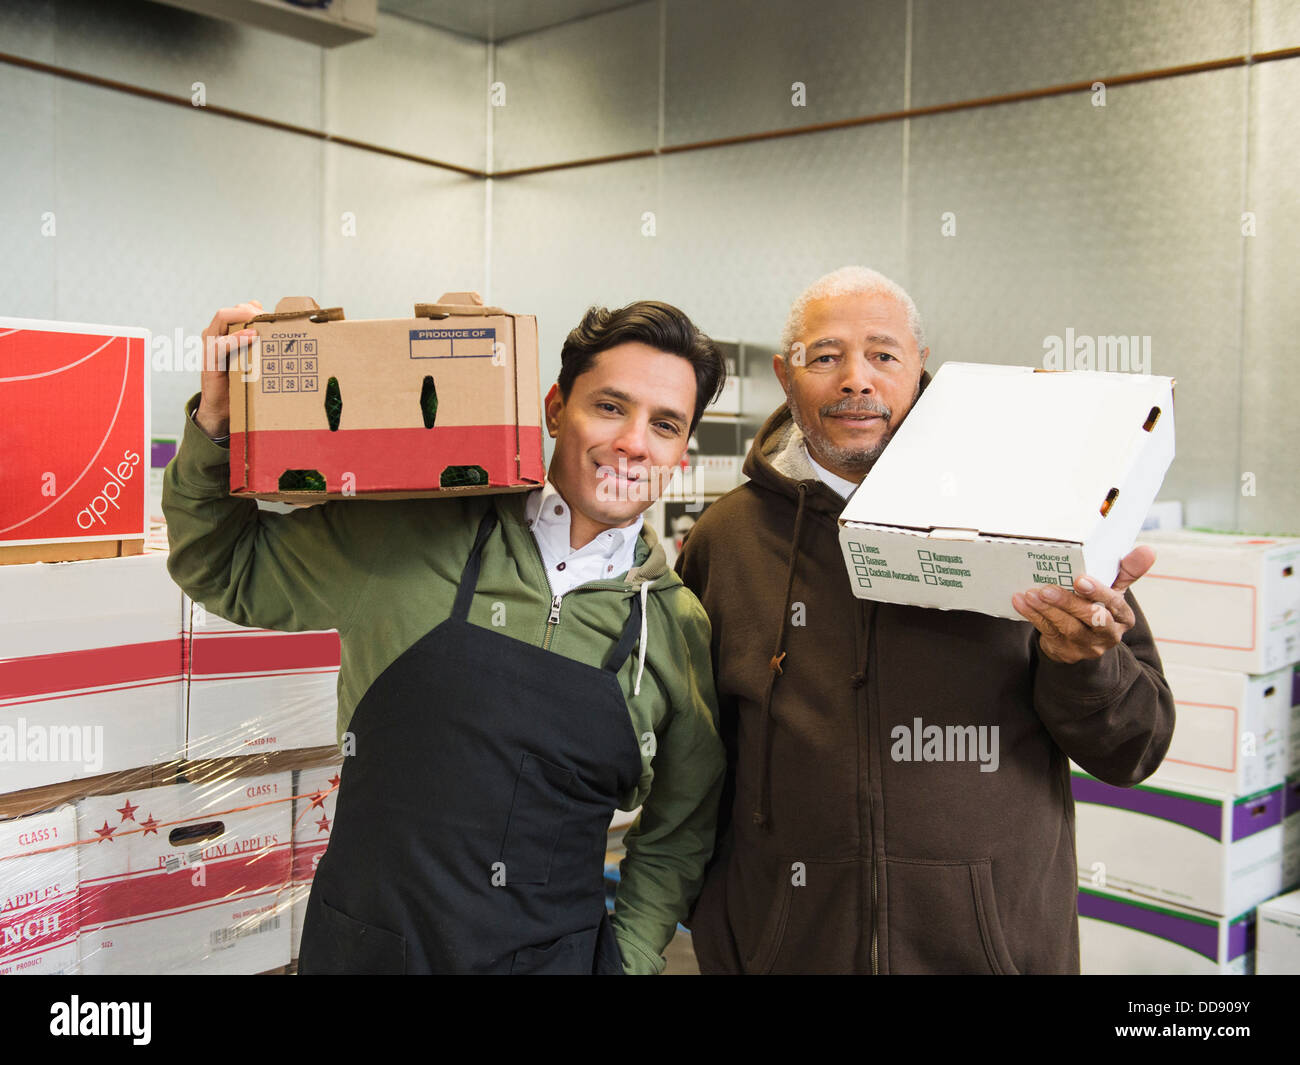 Workers carrying boxes in walk-in freezer Stock Photo